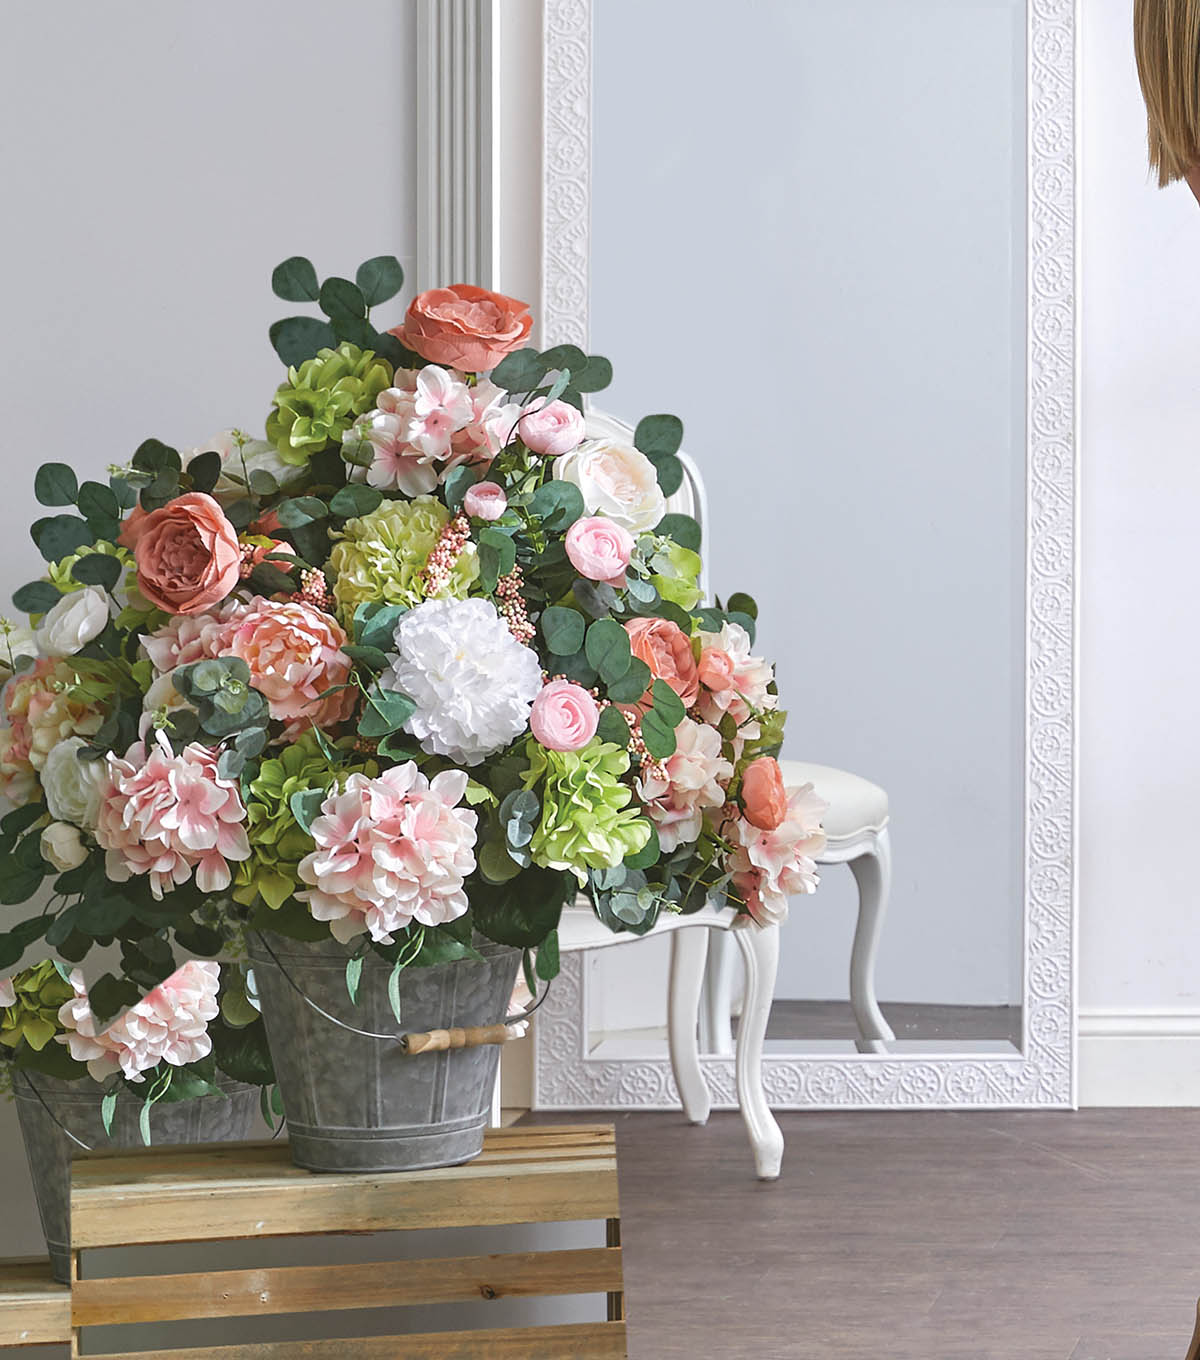 How To Make Entryway Floral Arrangements Joann